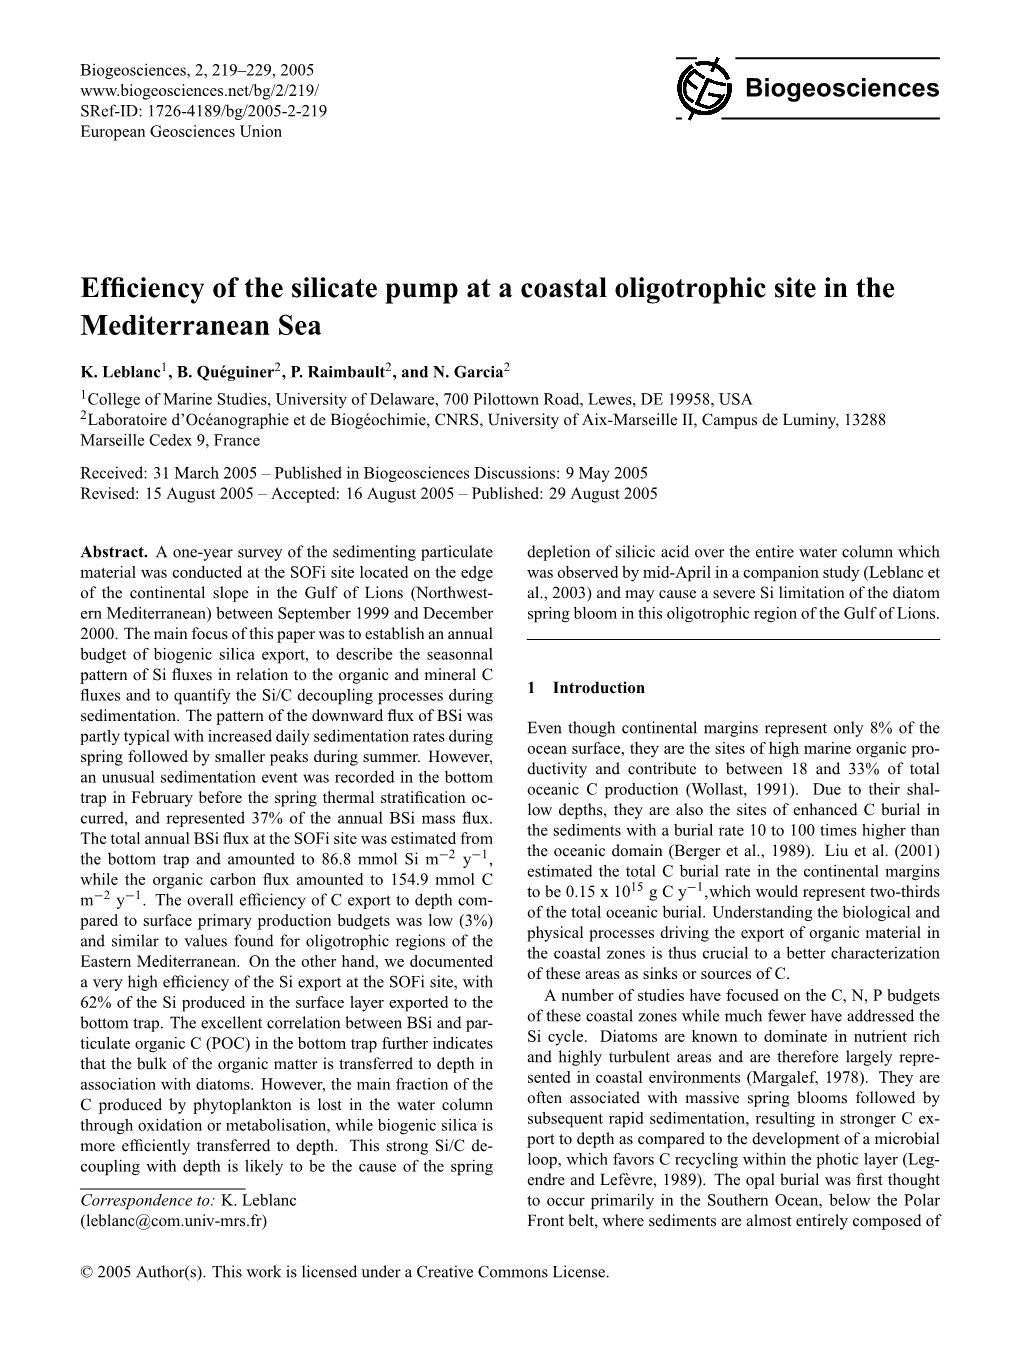 Efficiency of the Silicate Pump at a Coastal Oligotrophic Site in The